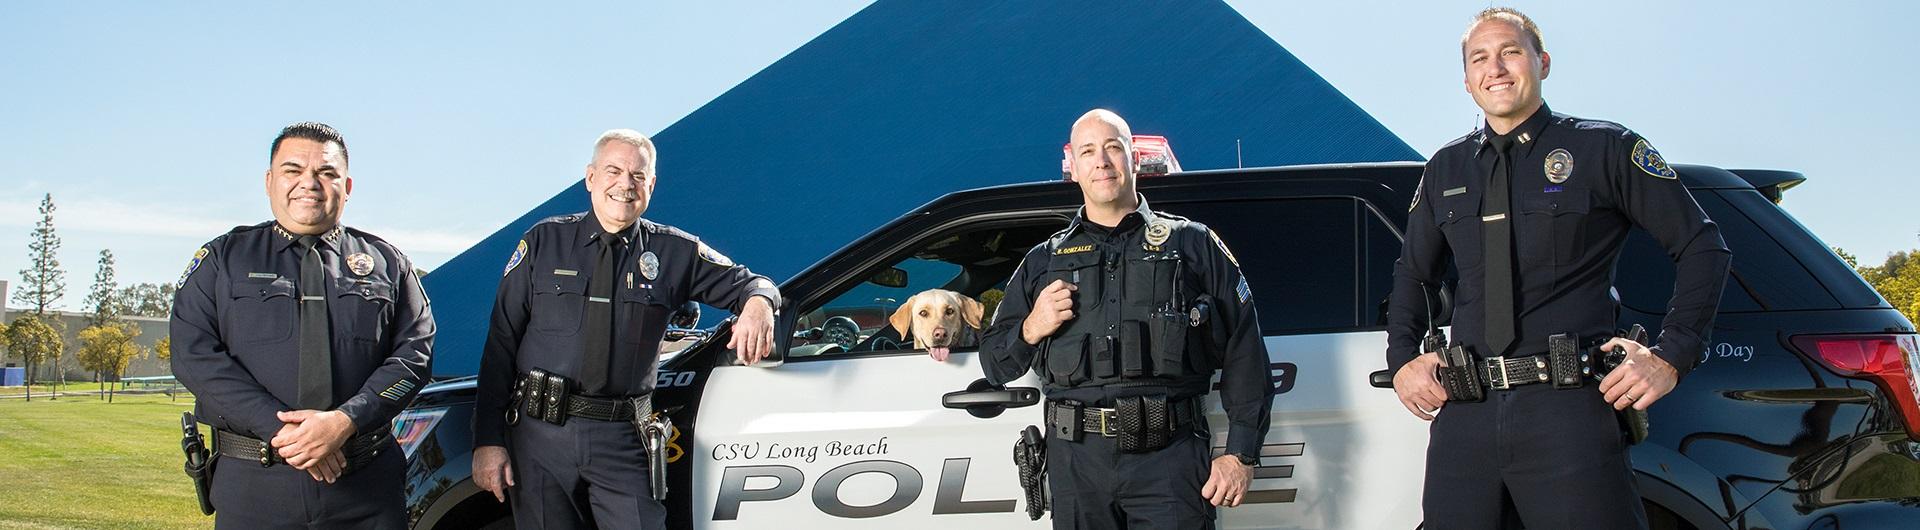 UPD Officers and K9 Unit